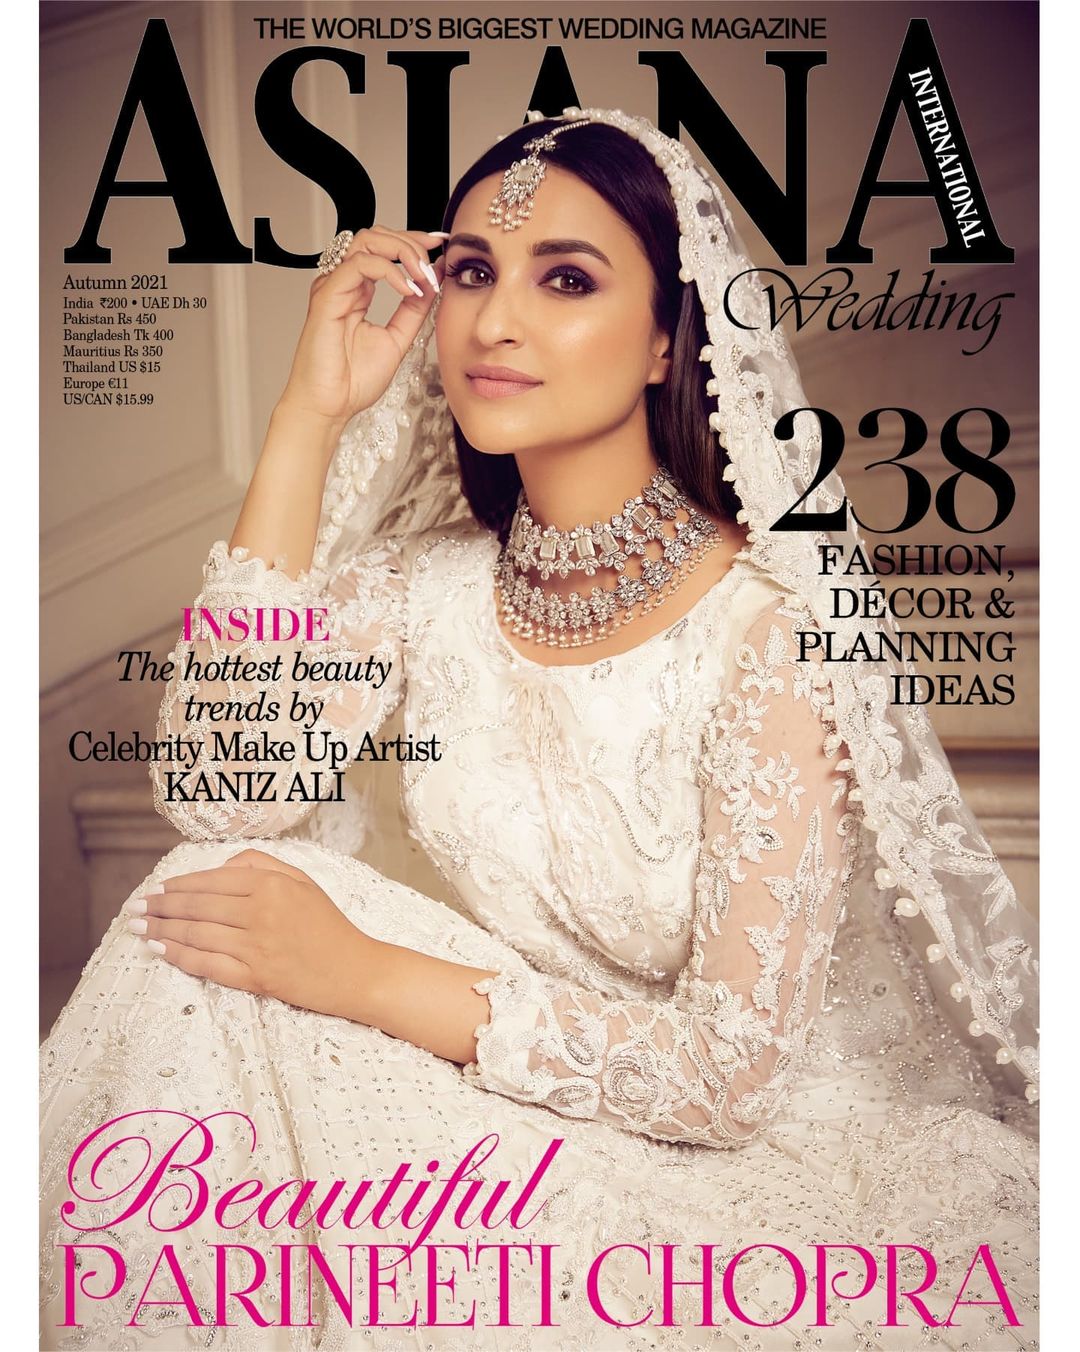 Parineeti Chopra looks graceful in the all-white look for Asiana Wedding.